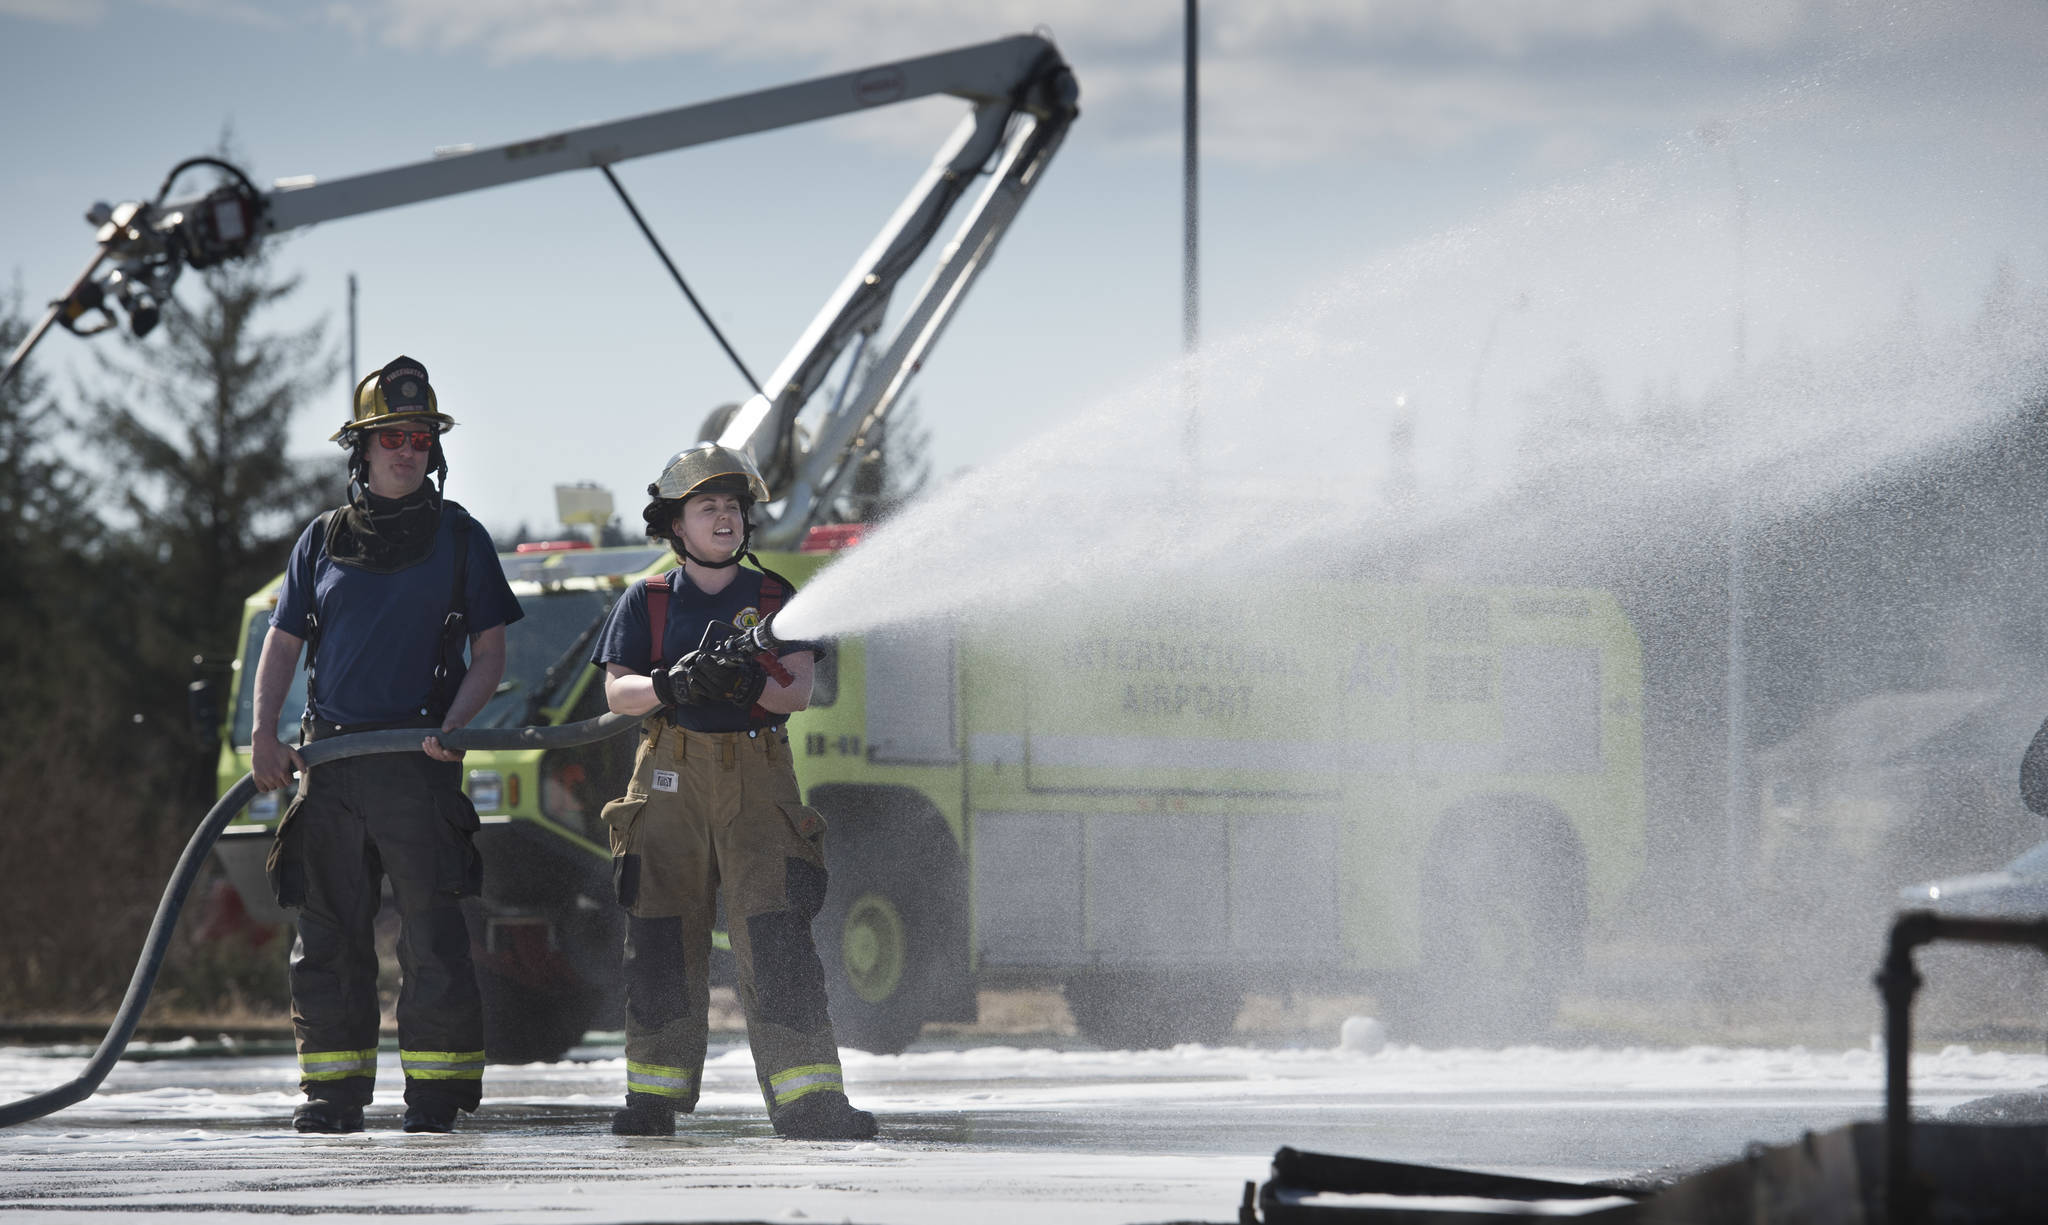 In this file photo from April 13, 2017, firefighters spray foam during a drill at the Hagevig Regional Fire Training Center. The state filed a lawsuit against several foam manufacturers for not disclosing contaminants in their products. (Michael Penn / Juneau Empire File)